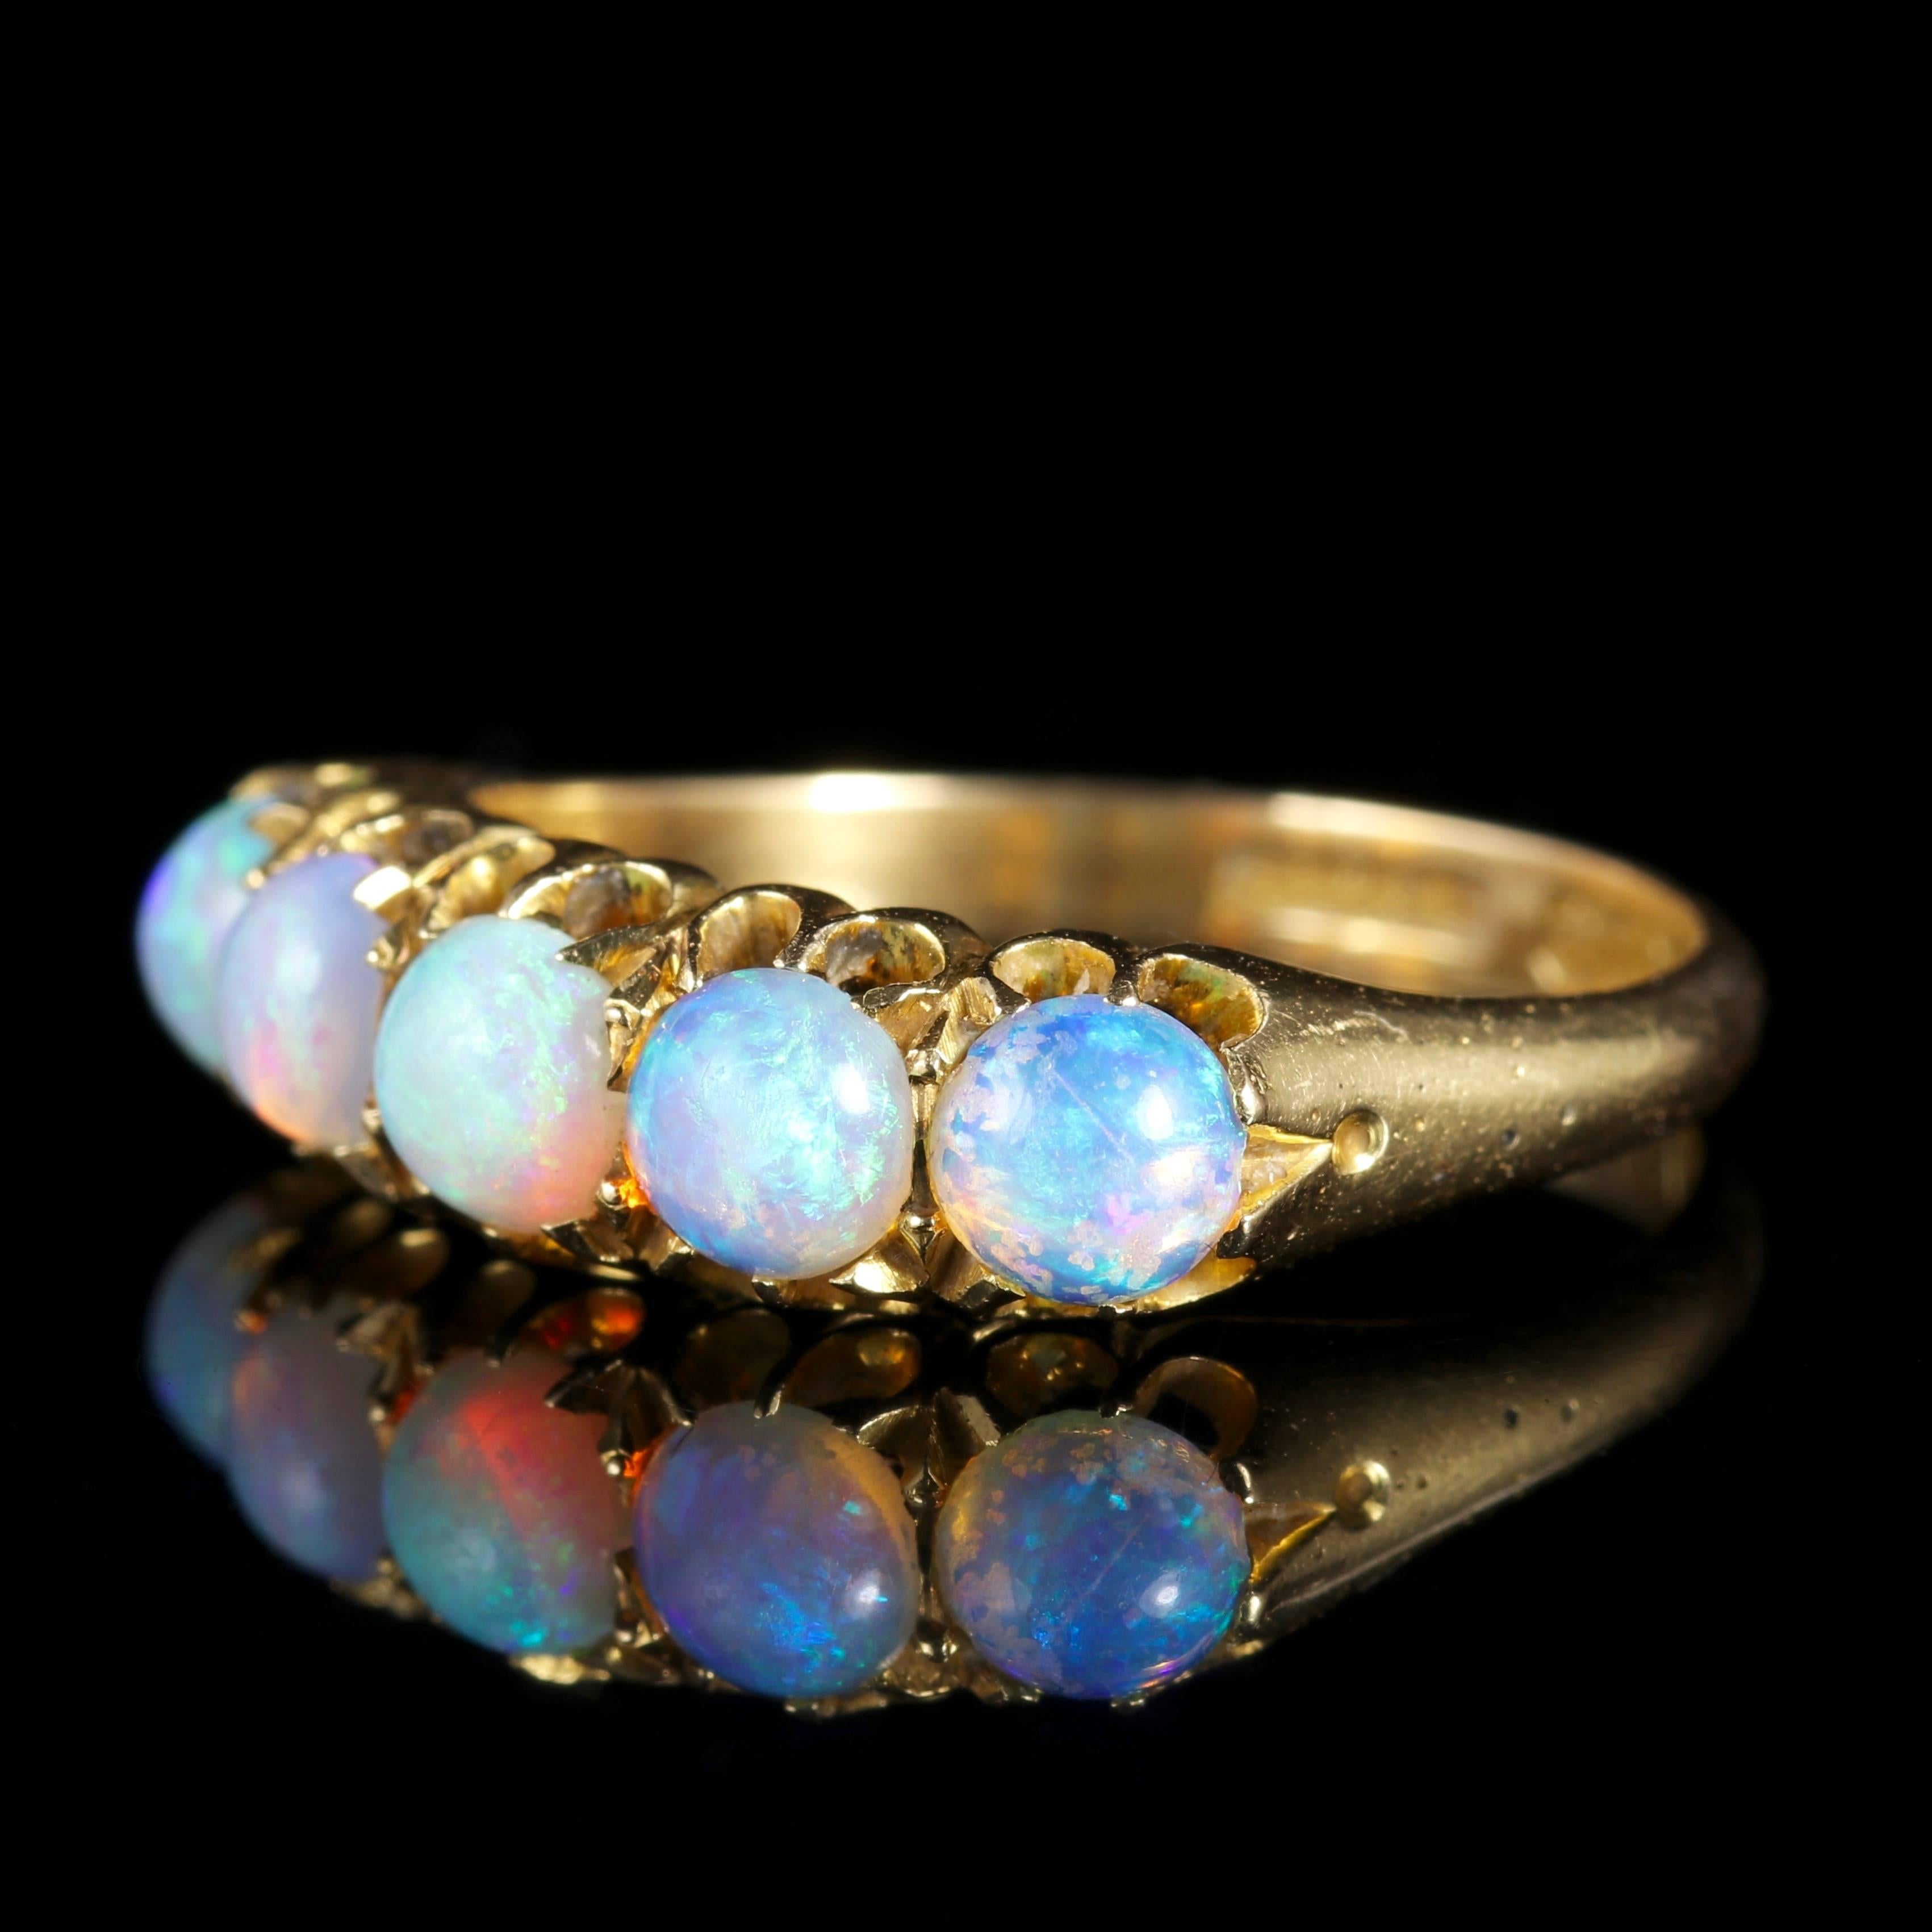 This fabulous antique 18ct Yellow Gold ring is set with five stunning natural Opals.

The ring is genuine Victorian leaning into Edwardian and fully hallmarked Birmingham 1901. 

The lovely natural Opal is a kaleidoscope of rainbow colours